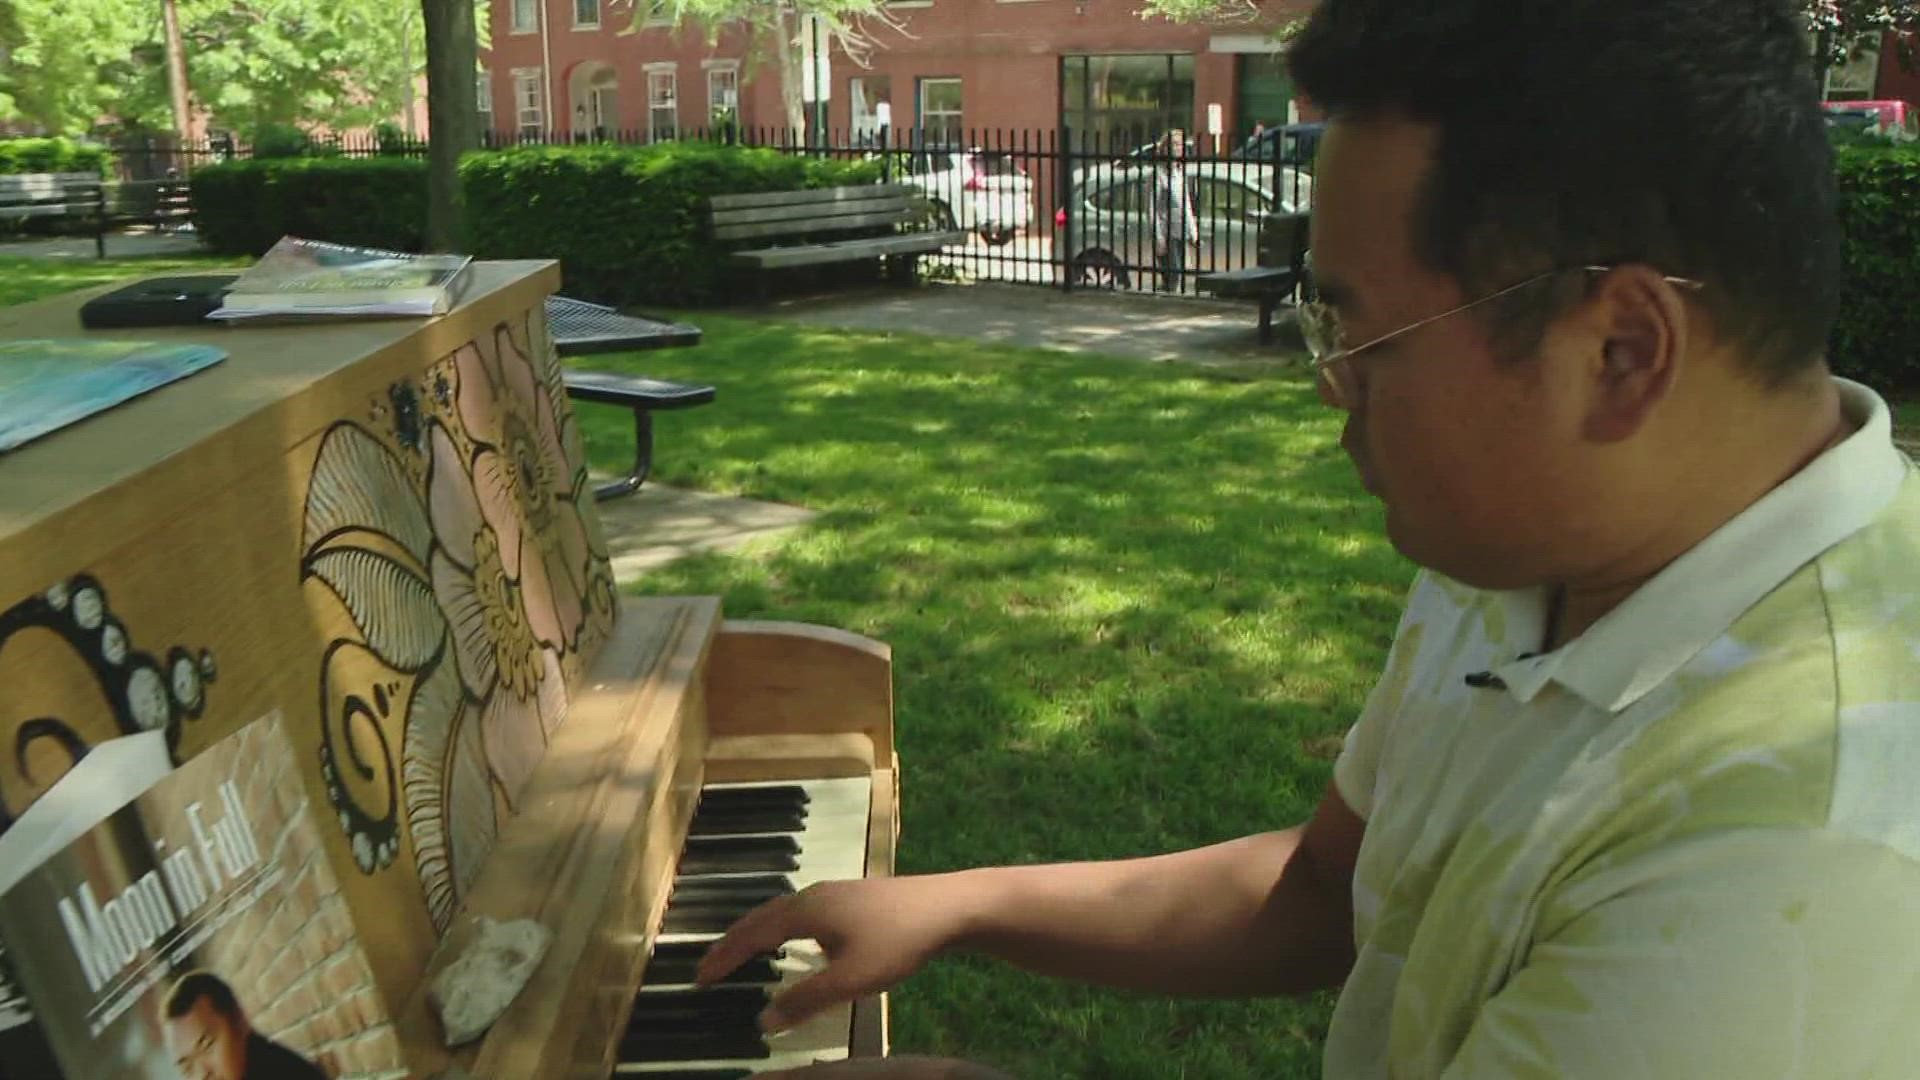 A piano in the park? Sure -- he can play that. And an original composition to boot.